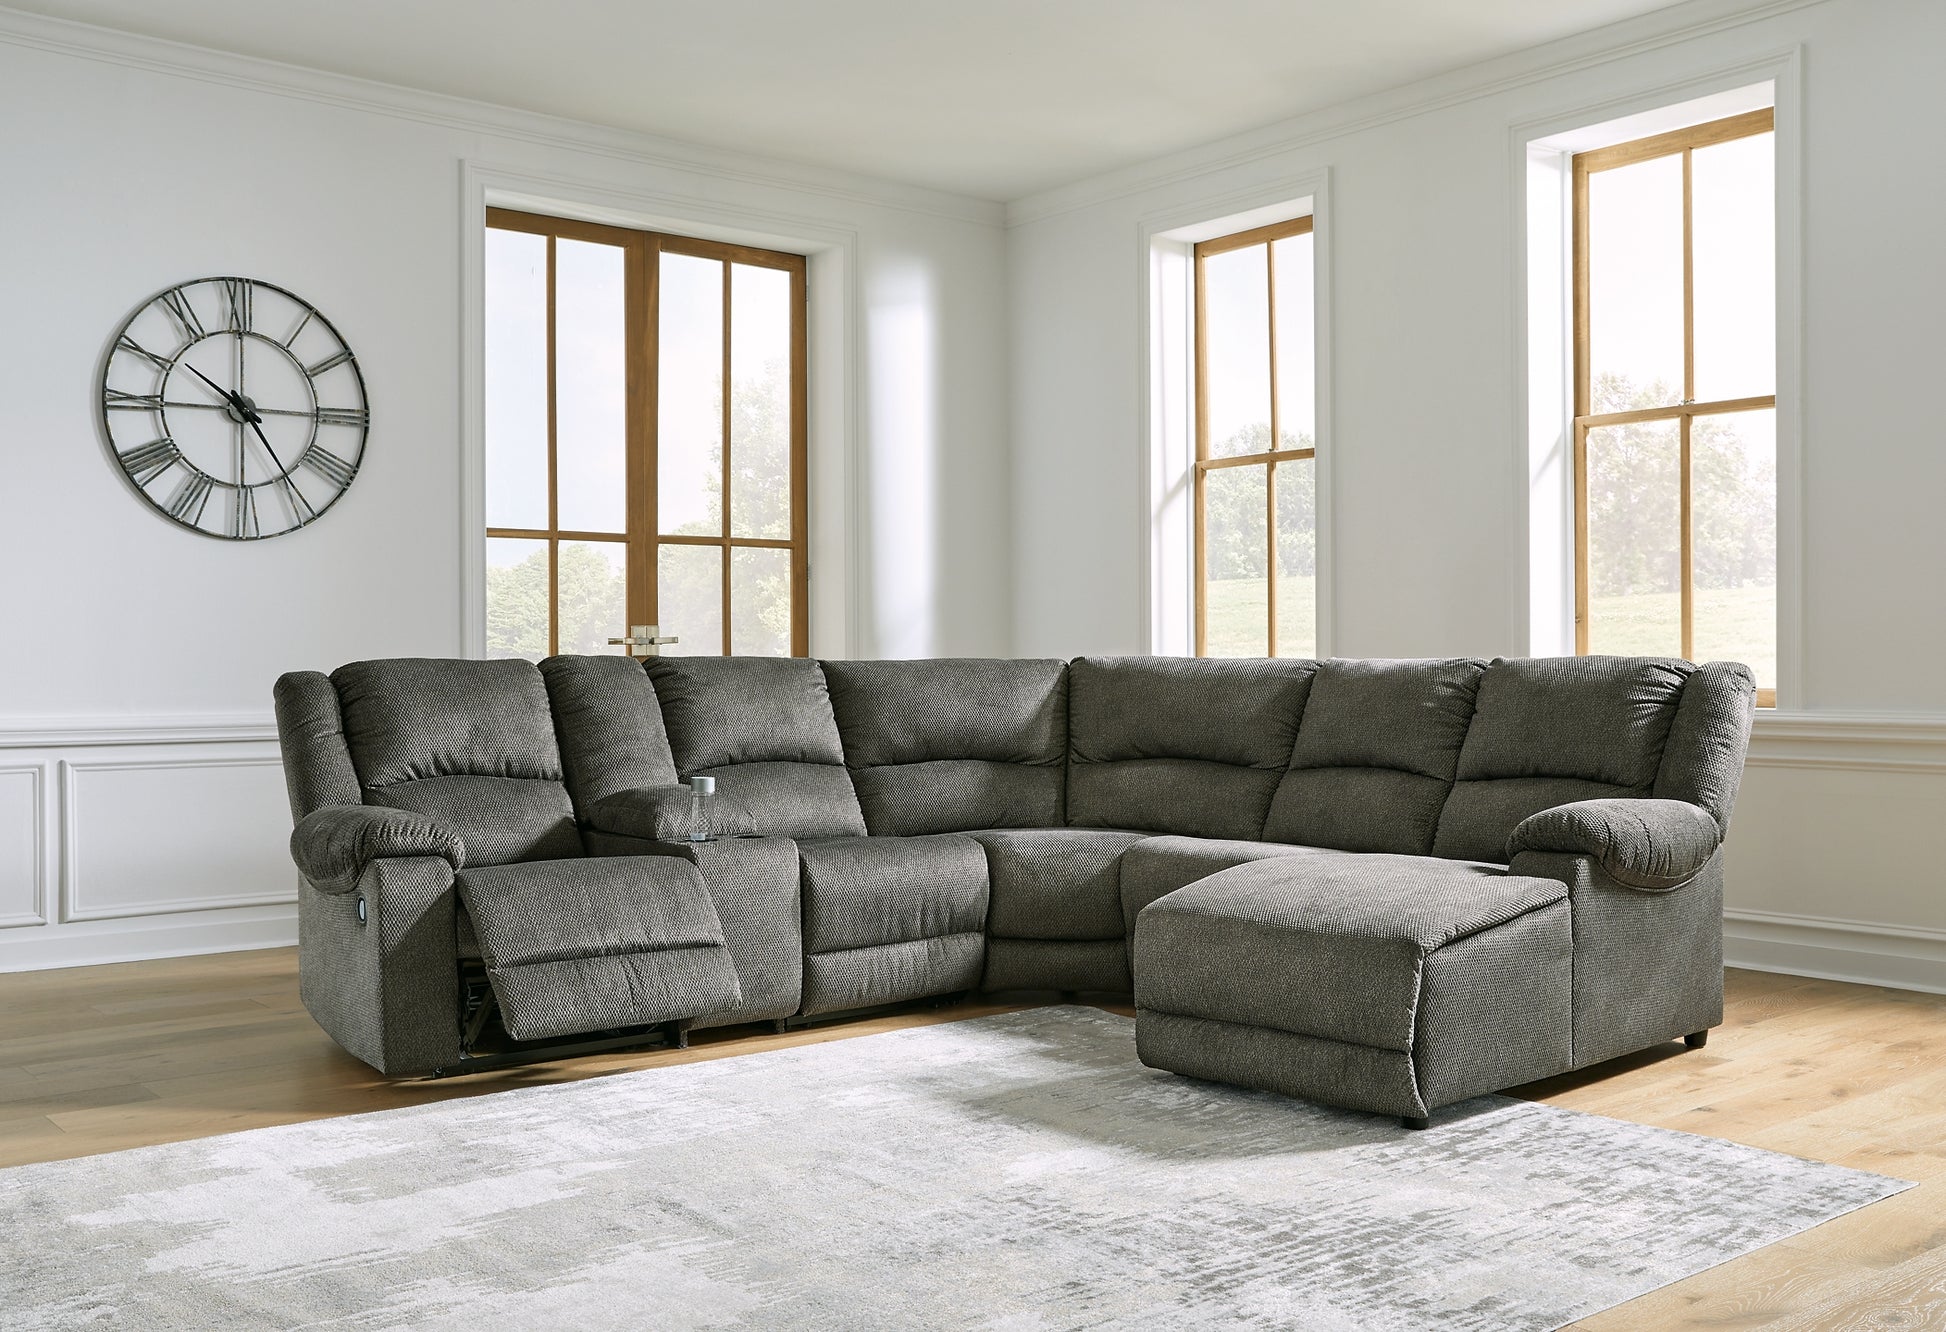 Benlocke 6 Piece Reclining Sectional With Chaise Furniture World Super